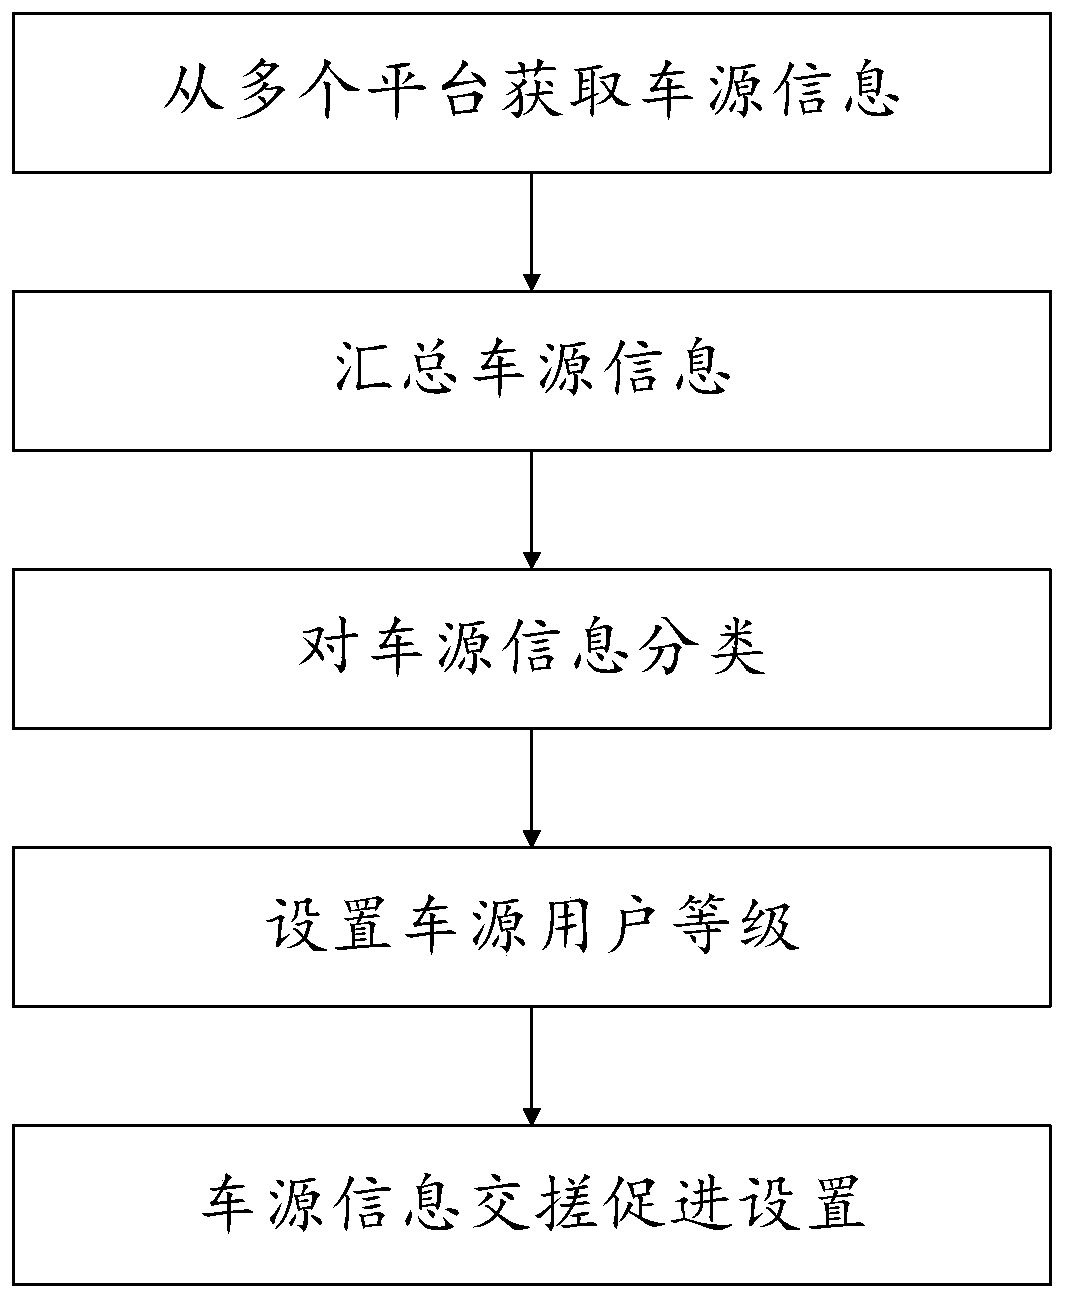 Vehicle source information processing method, system and device